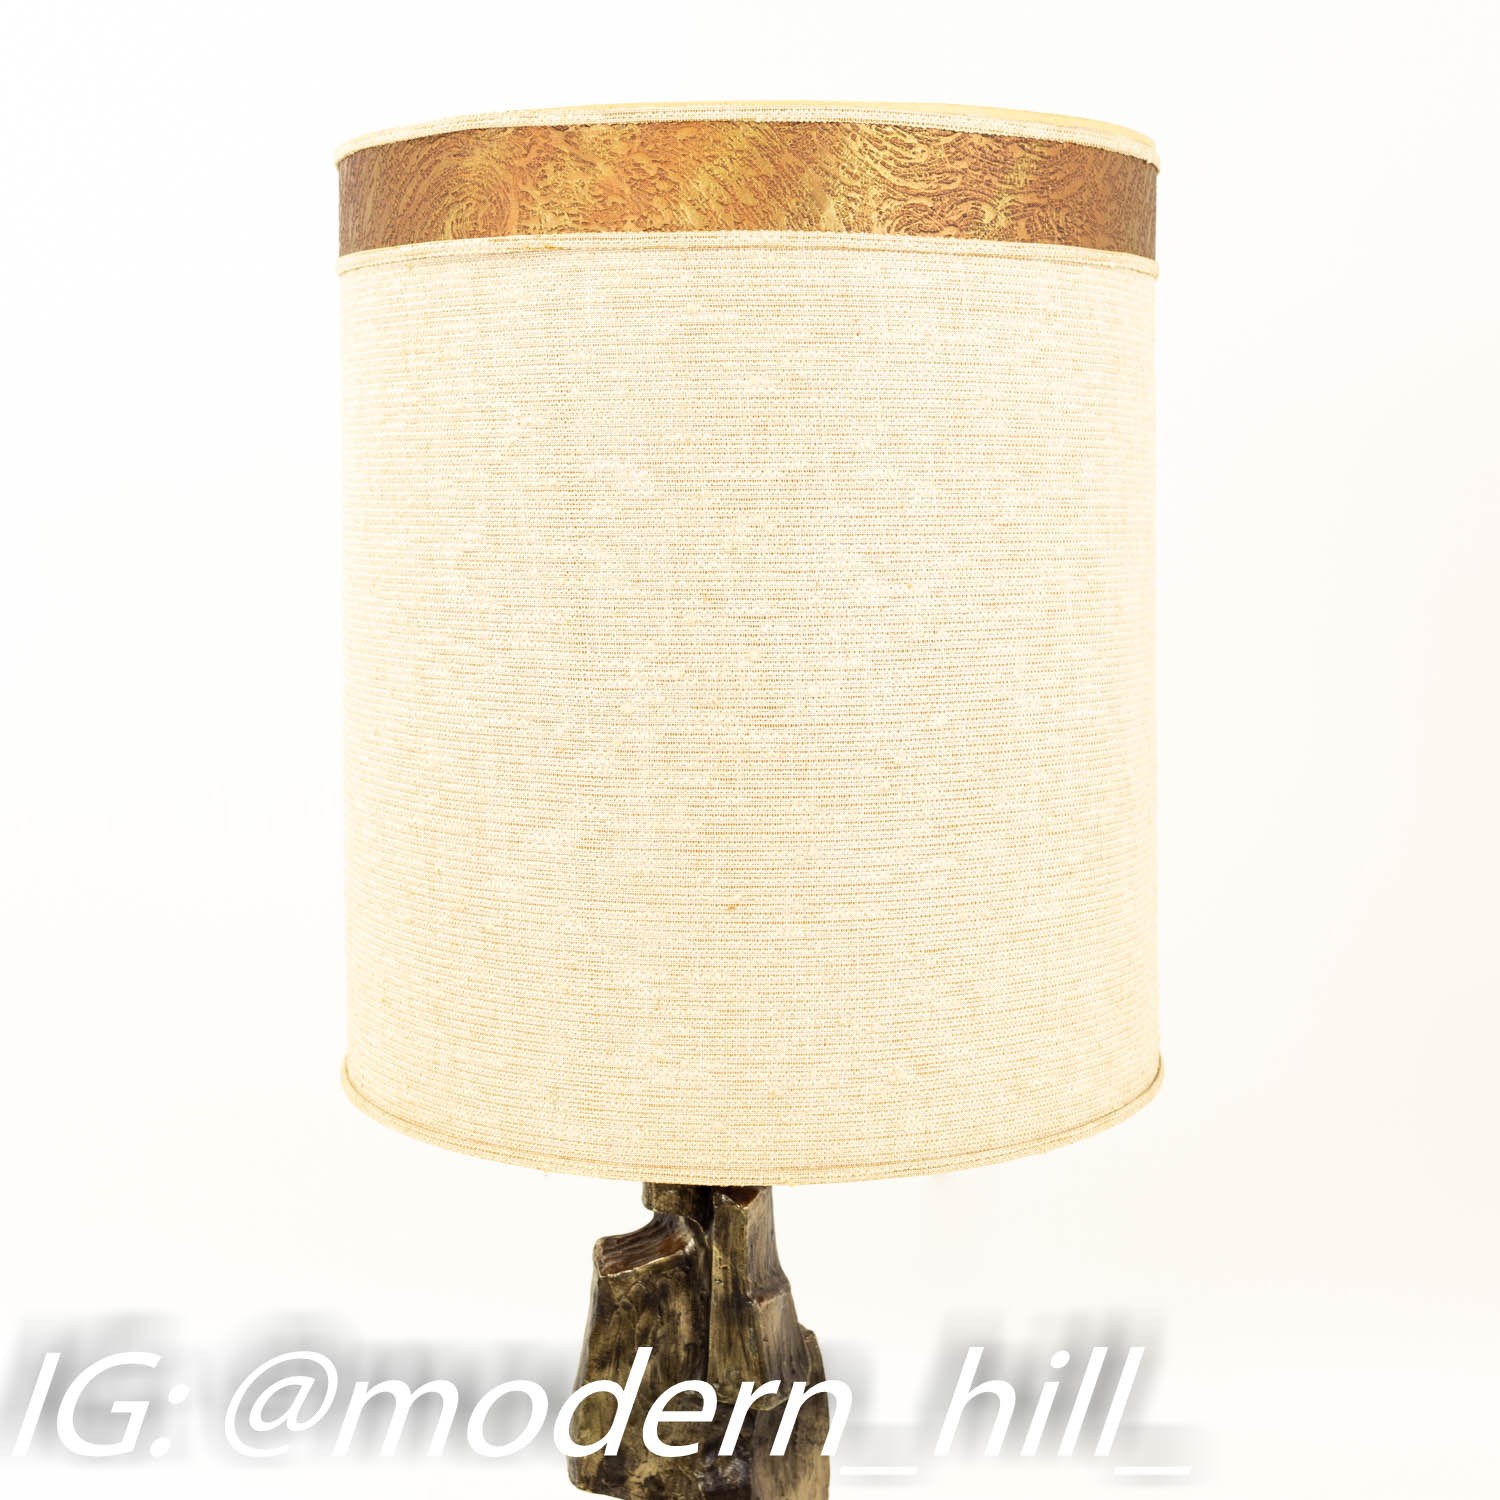 Richard Barr and Harold Weiss for Laurel Tall Weathered Brass Mid Century Table Lamp with Original Shade